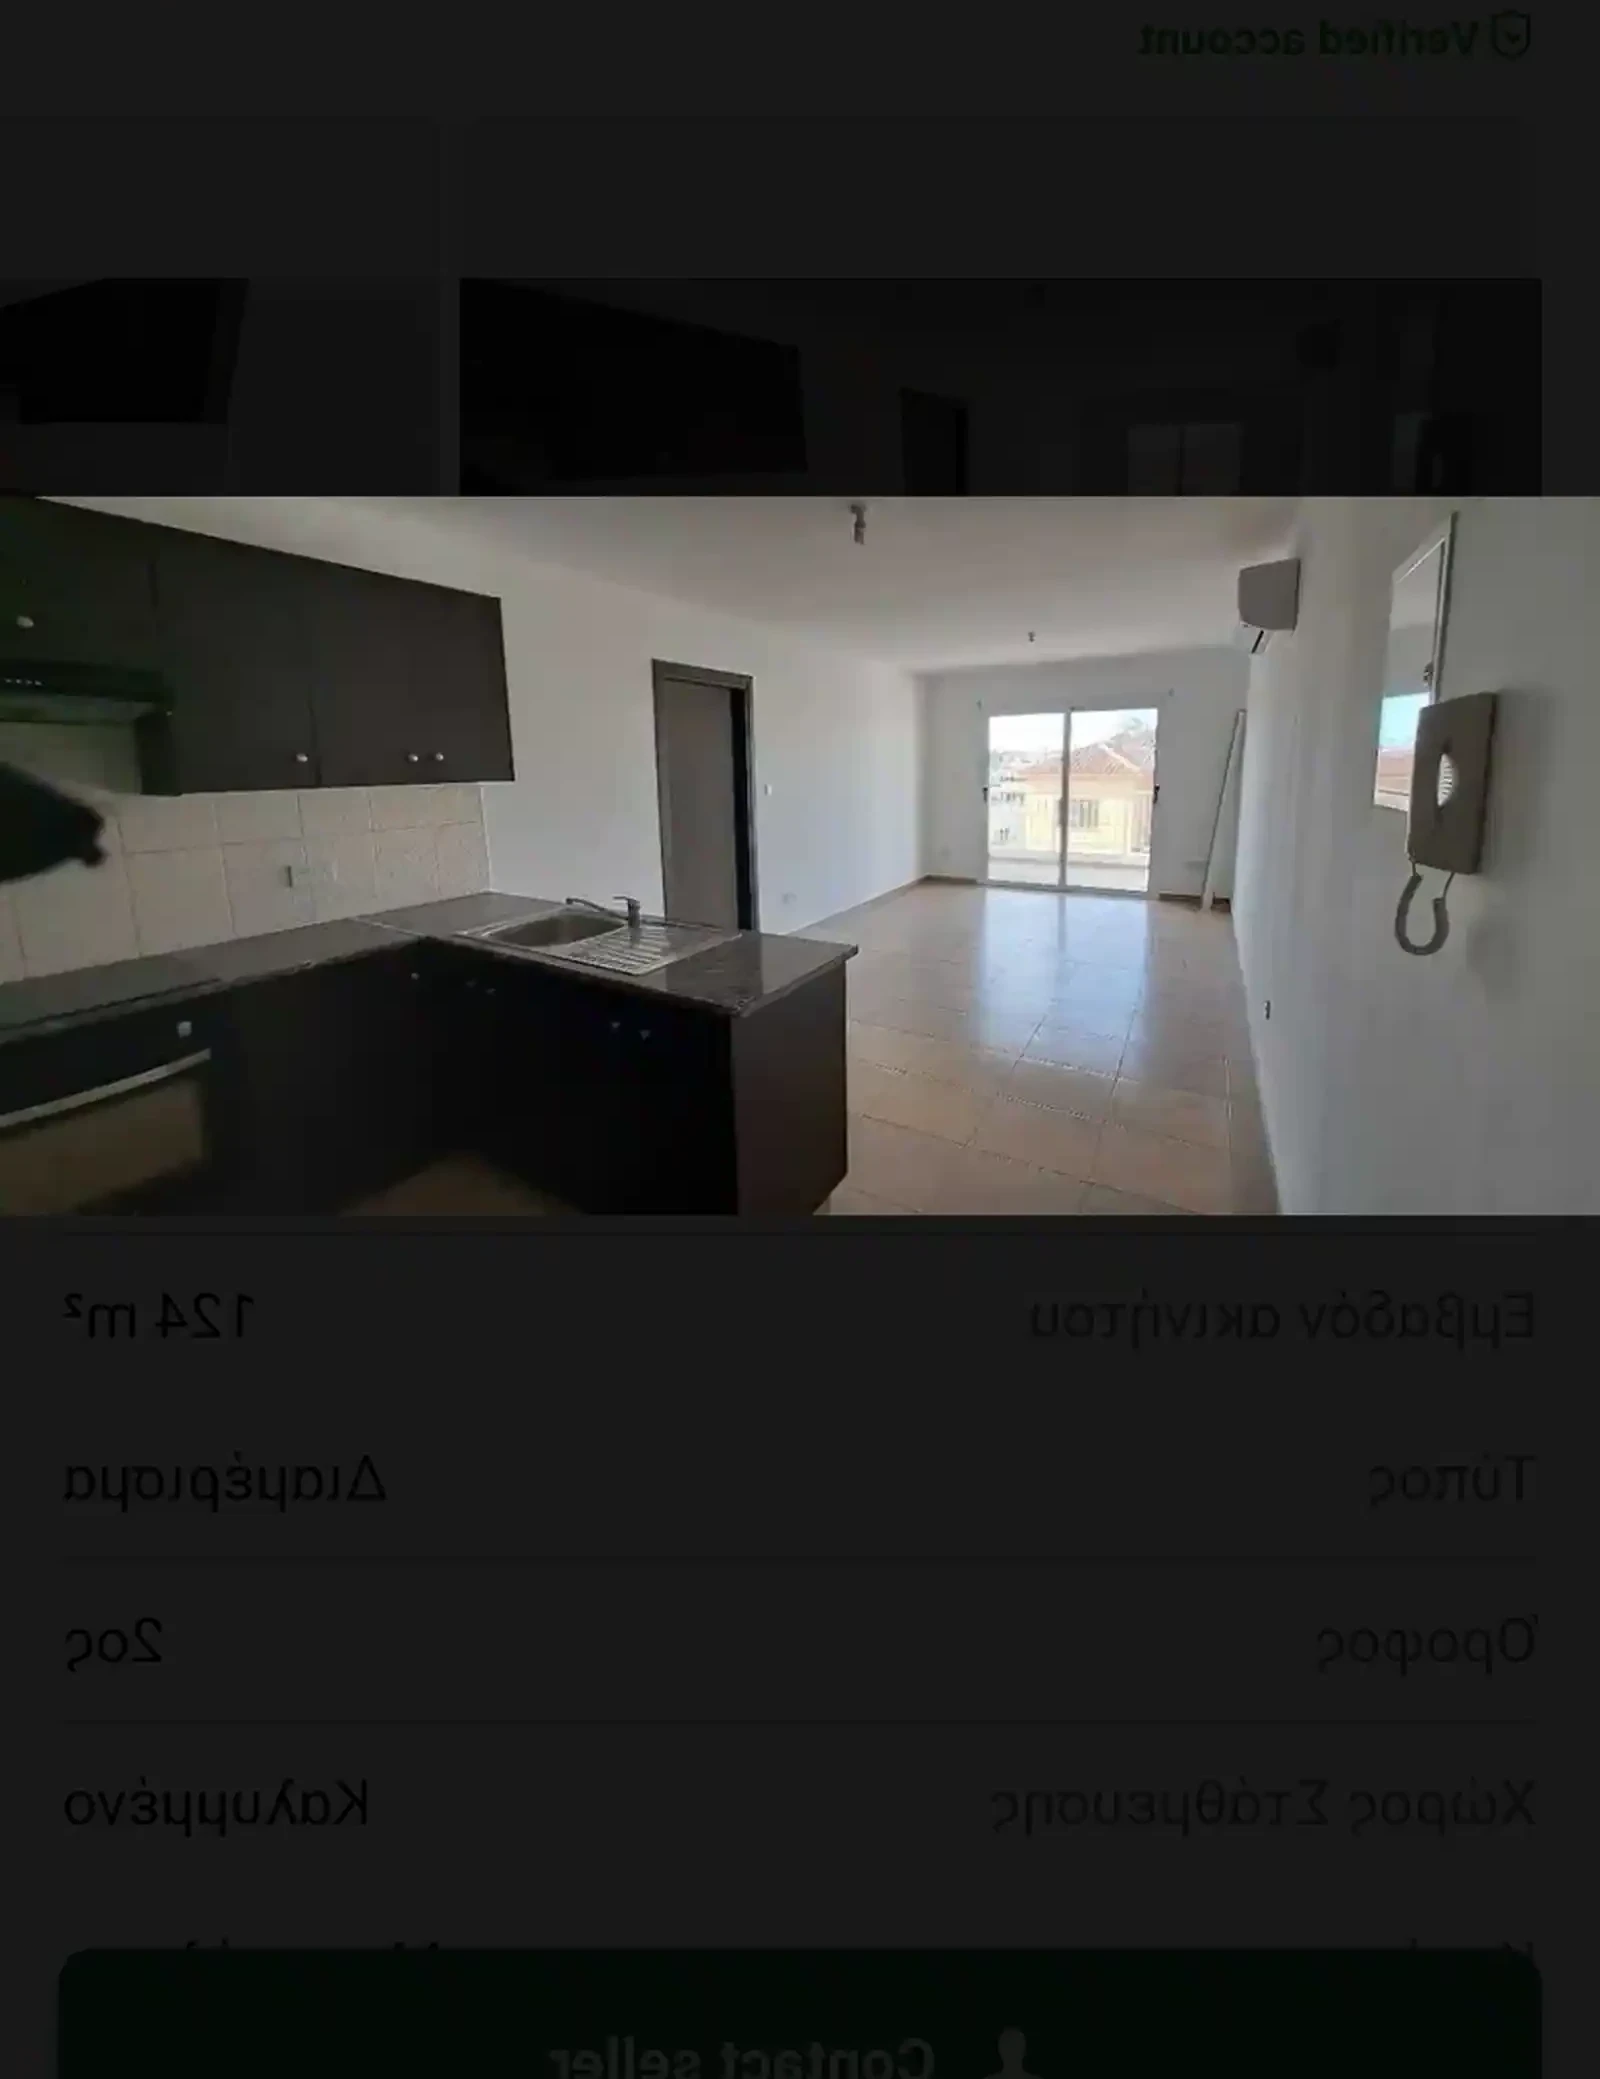 3-bedroom apartment fоr sаle €99.500, image 1